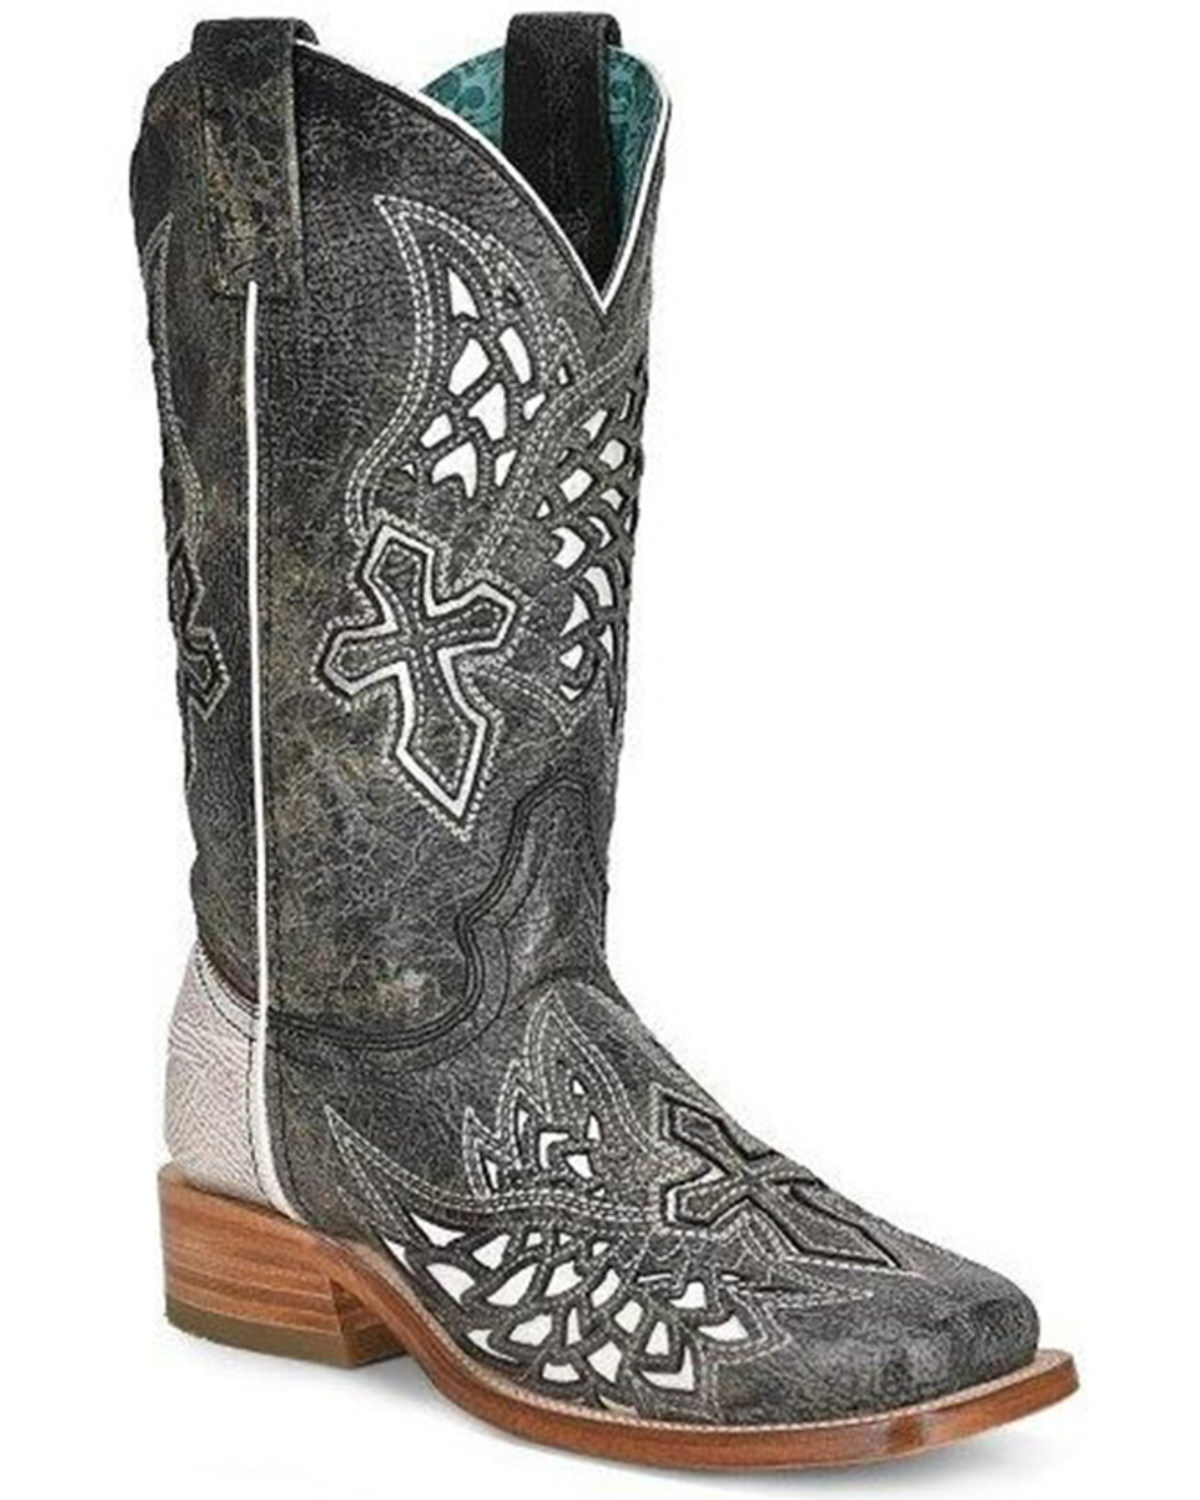 Corral Women's Inlay Western Boots - Broad Square Toe